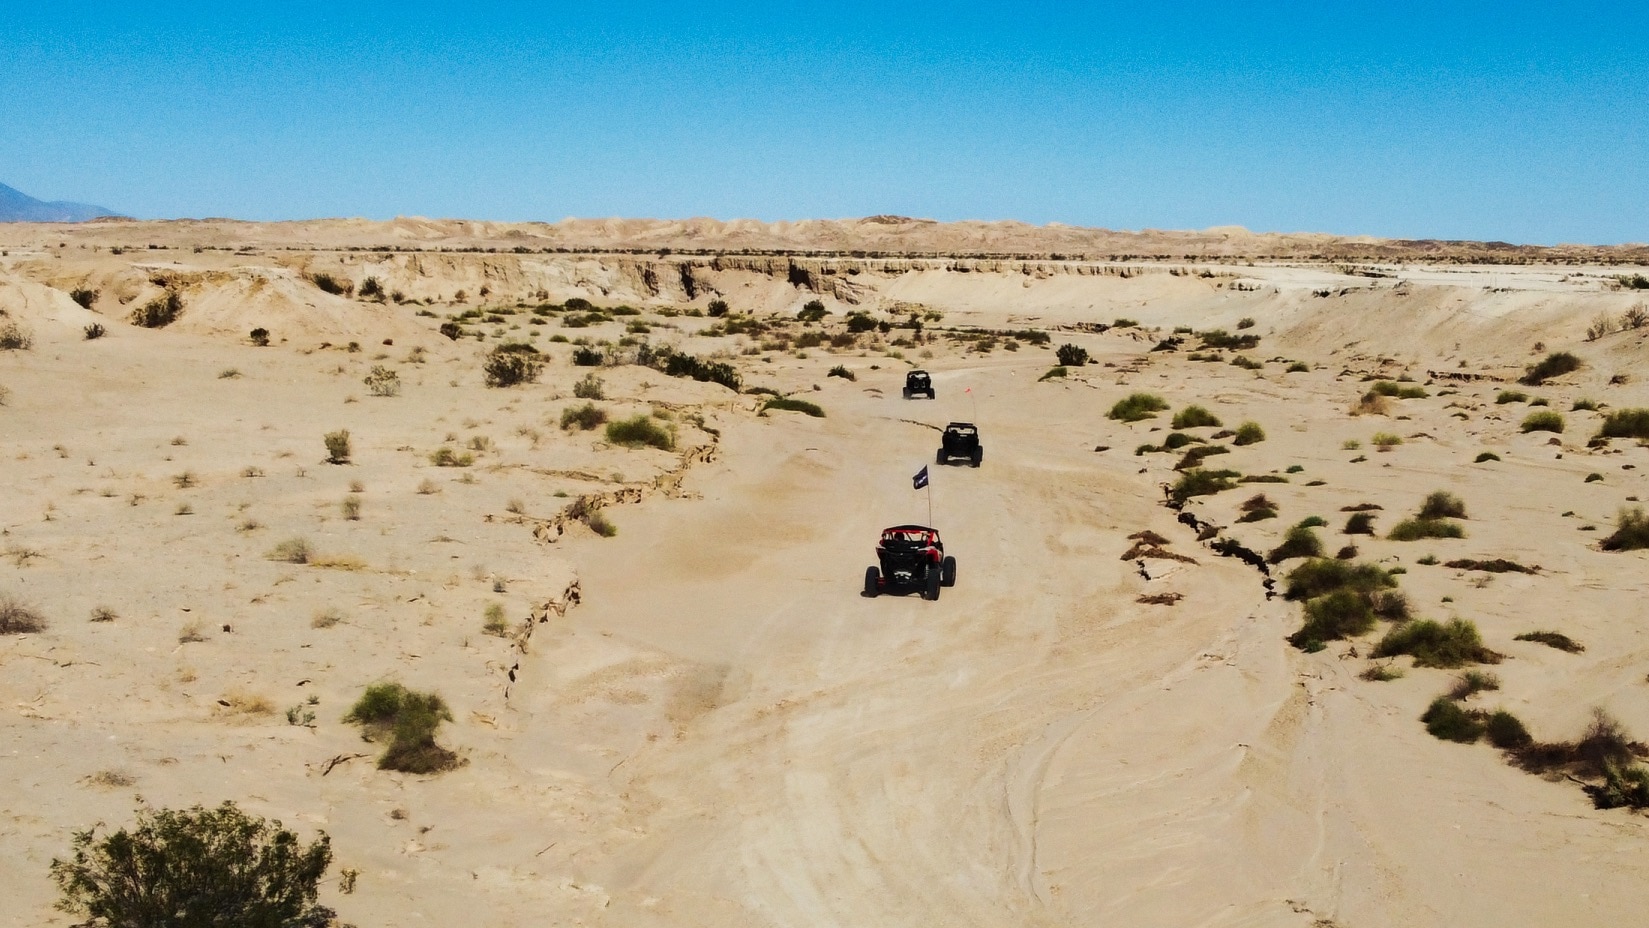 A group of off-roaders on ssv riding in the desert